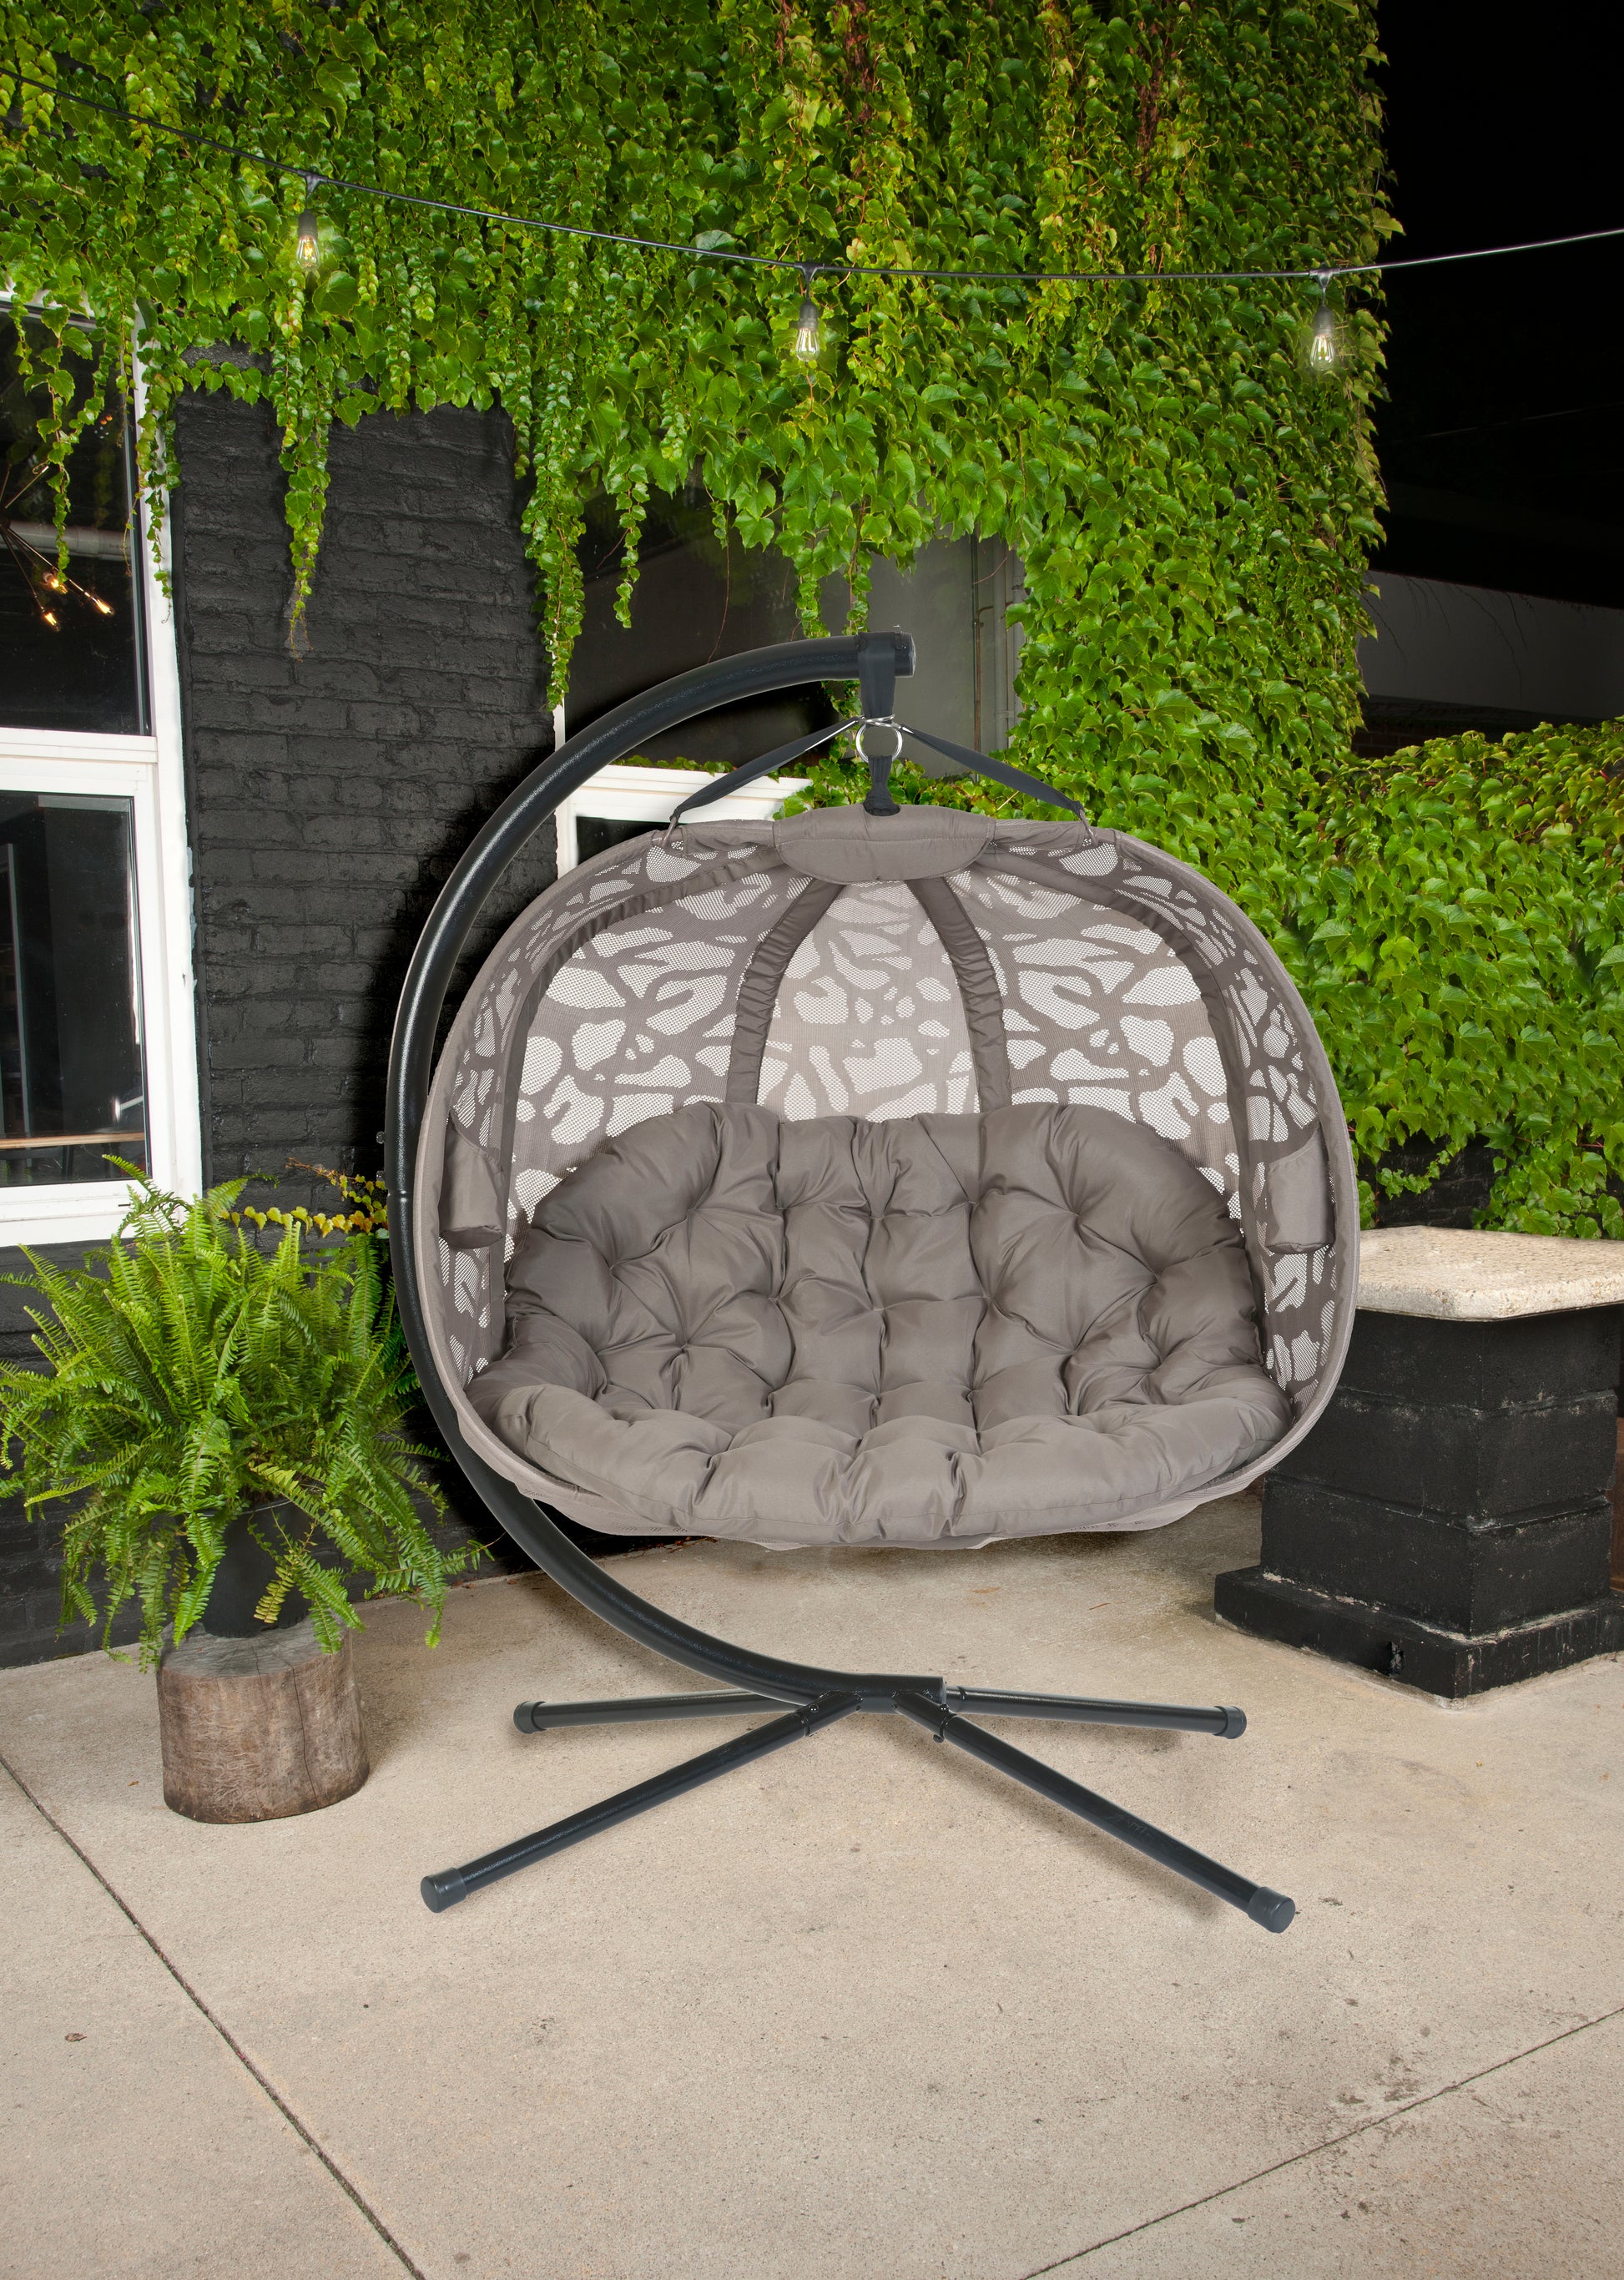 FlowerHouse Hanging Pumpkin Loveseat Chair with stand-Branch